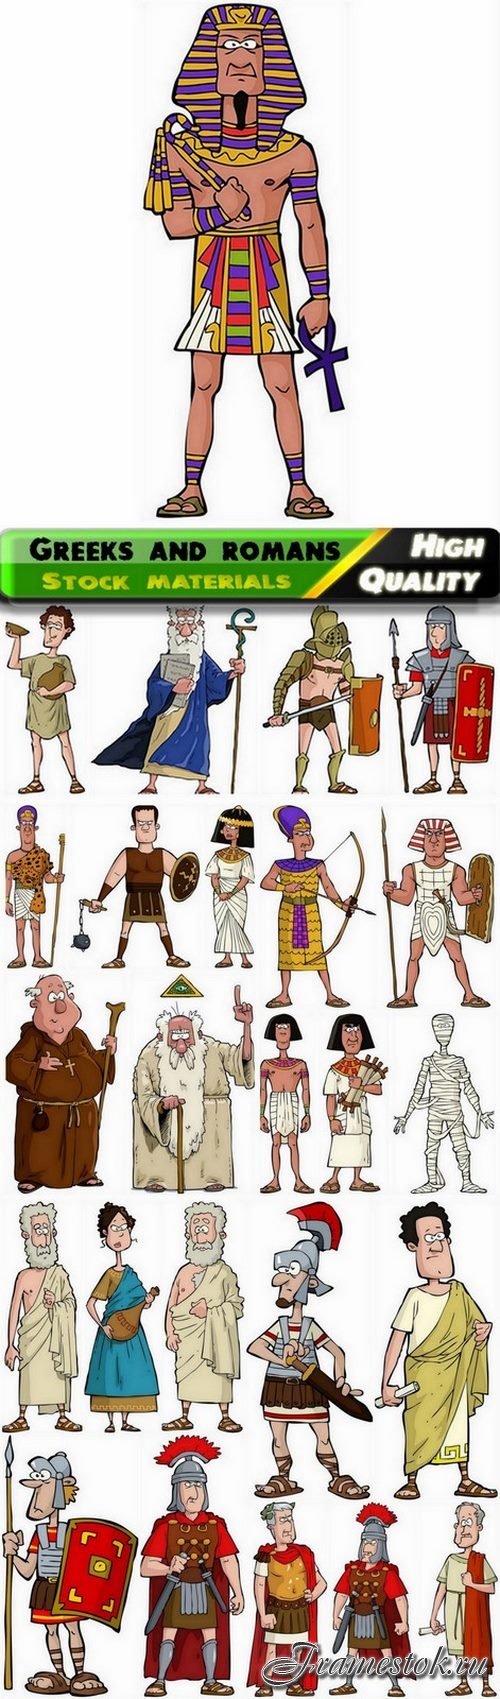 Funny cartoon ancient greeks and romans - 25 Eps